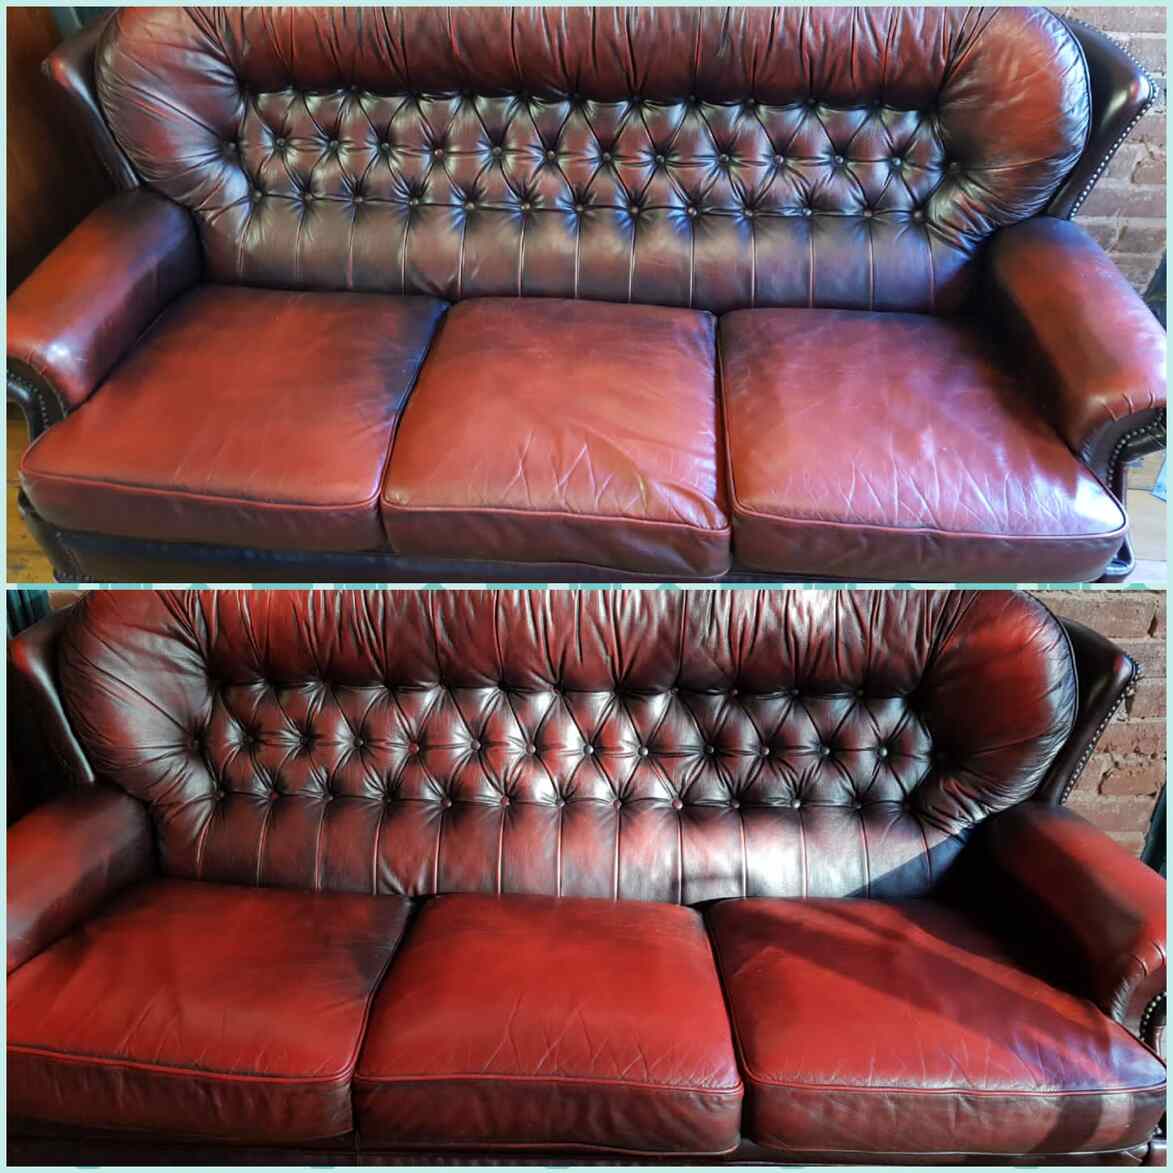 Leather sofa before and after cleaning